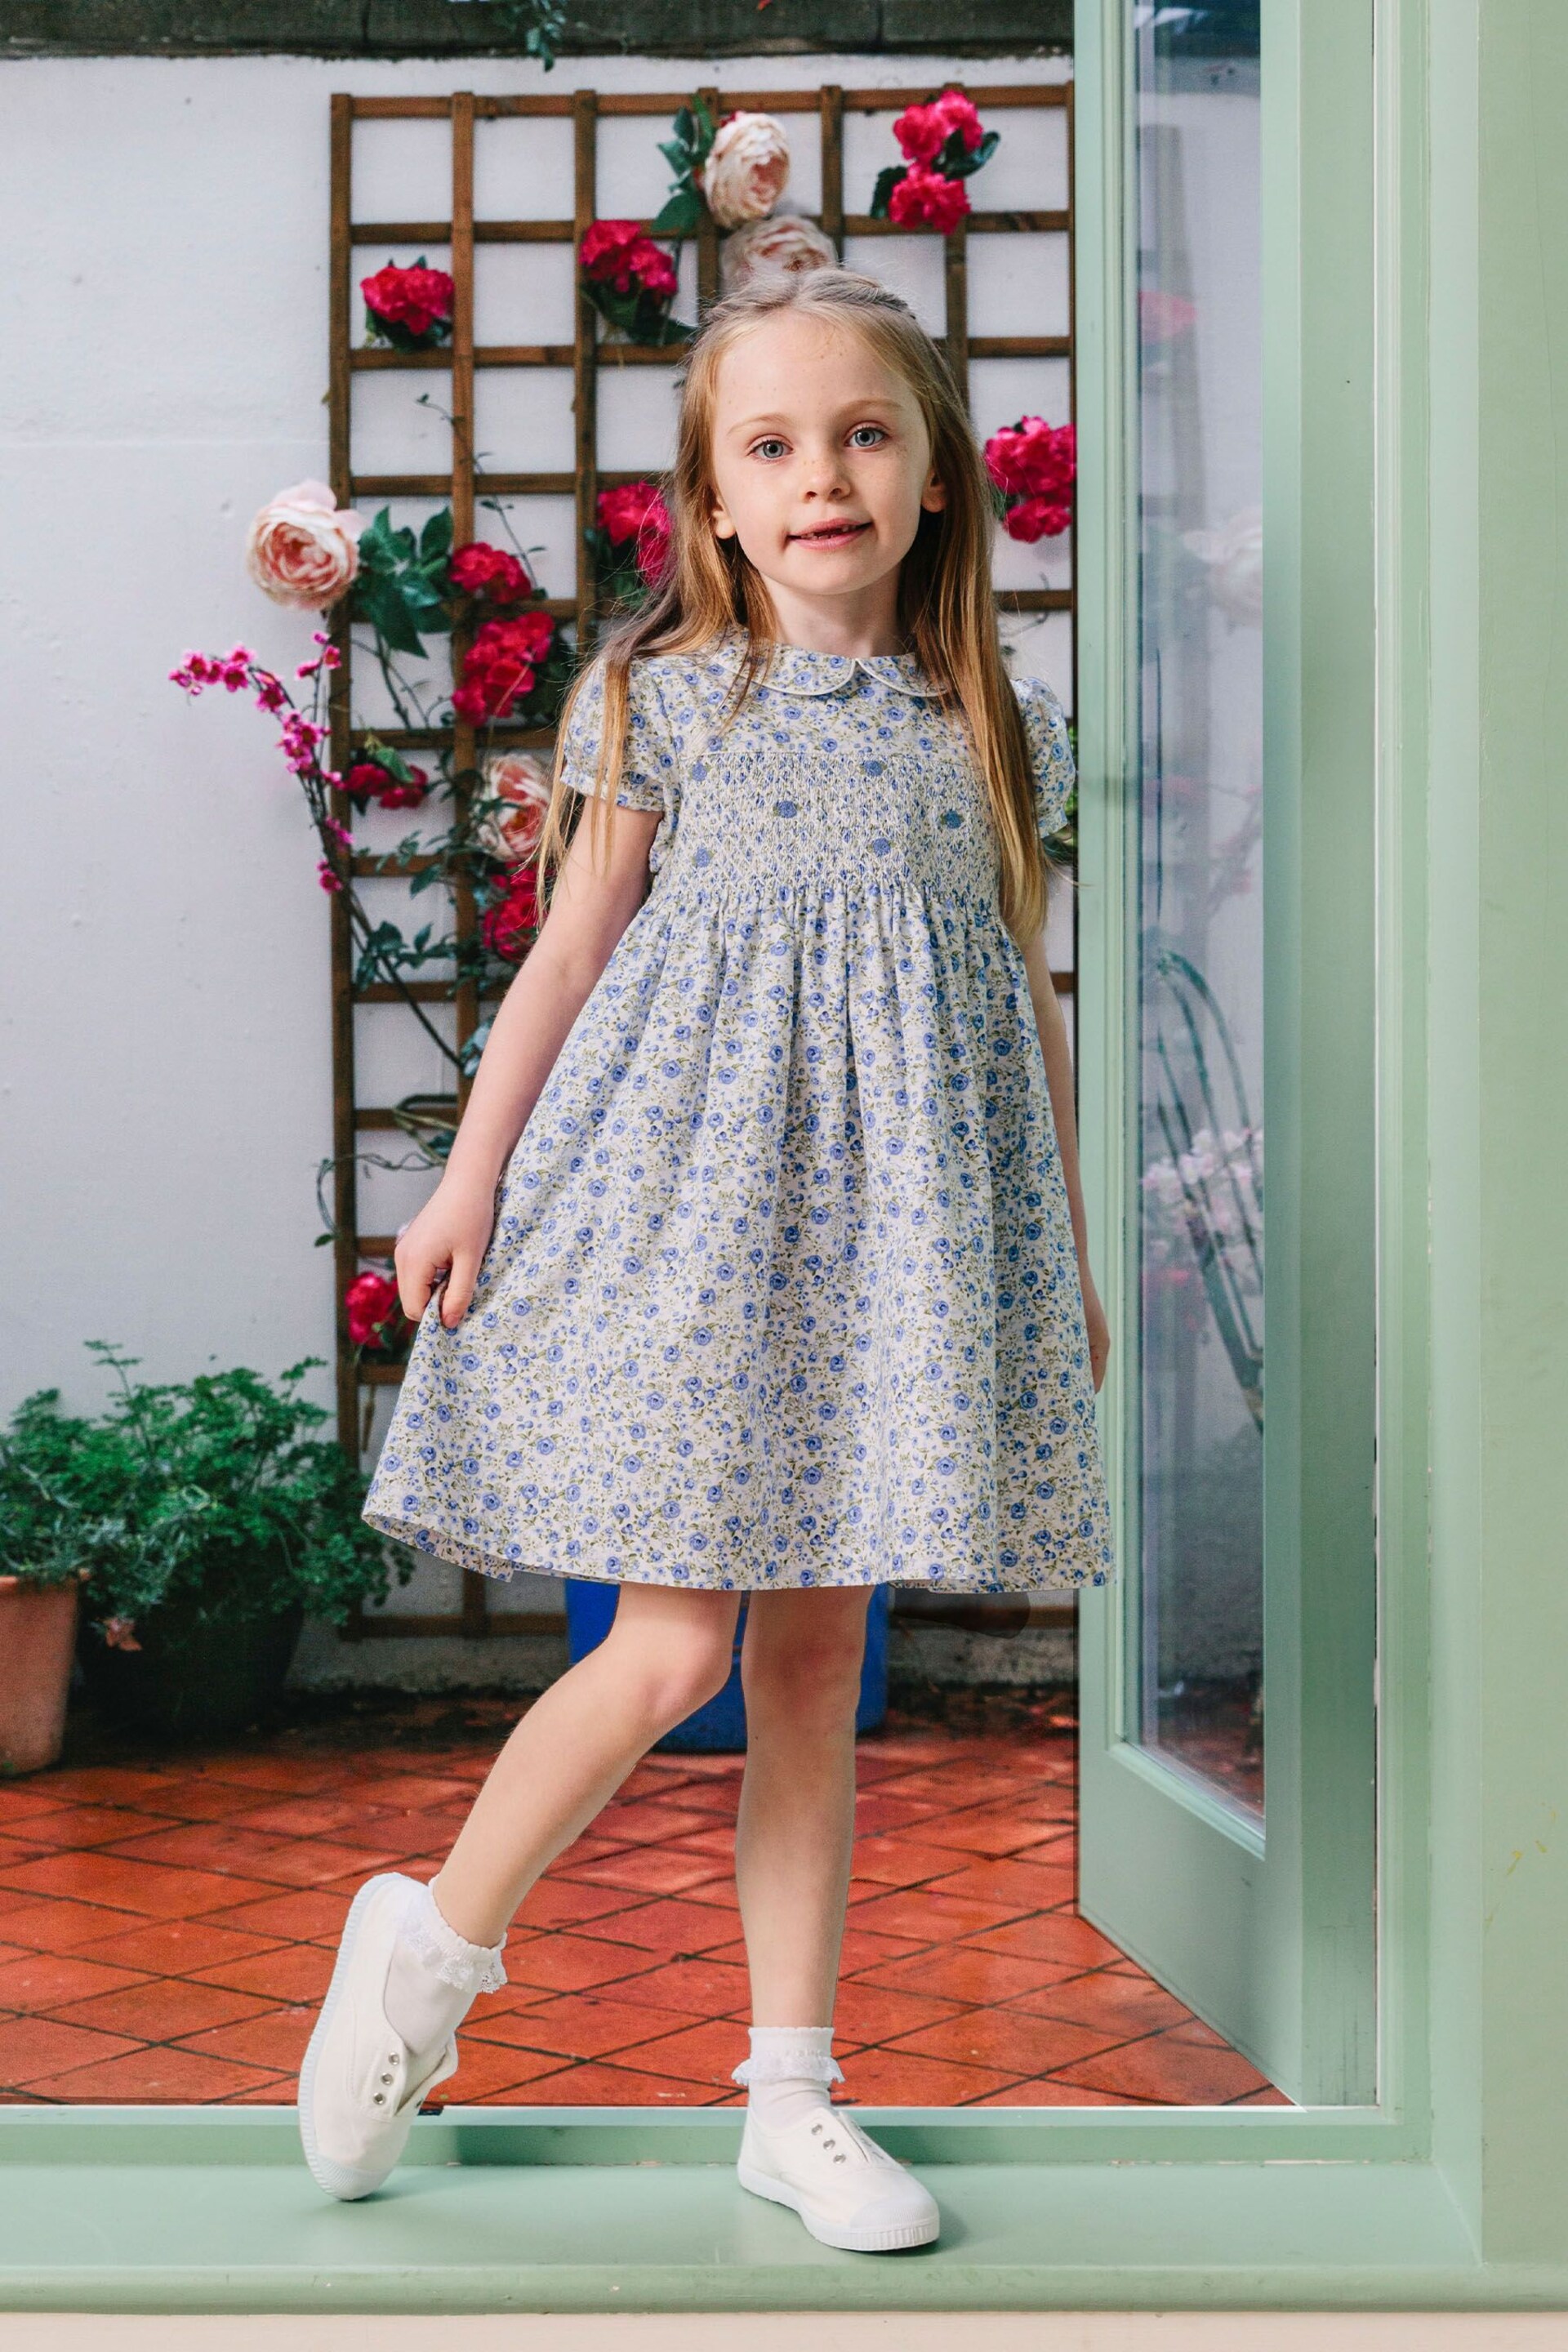 Trotters London Rose Catherine Rose Smocked Cotton Dress - Image 1 of 7